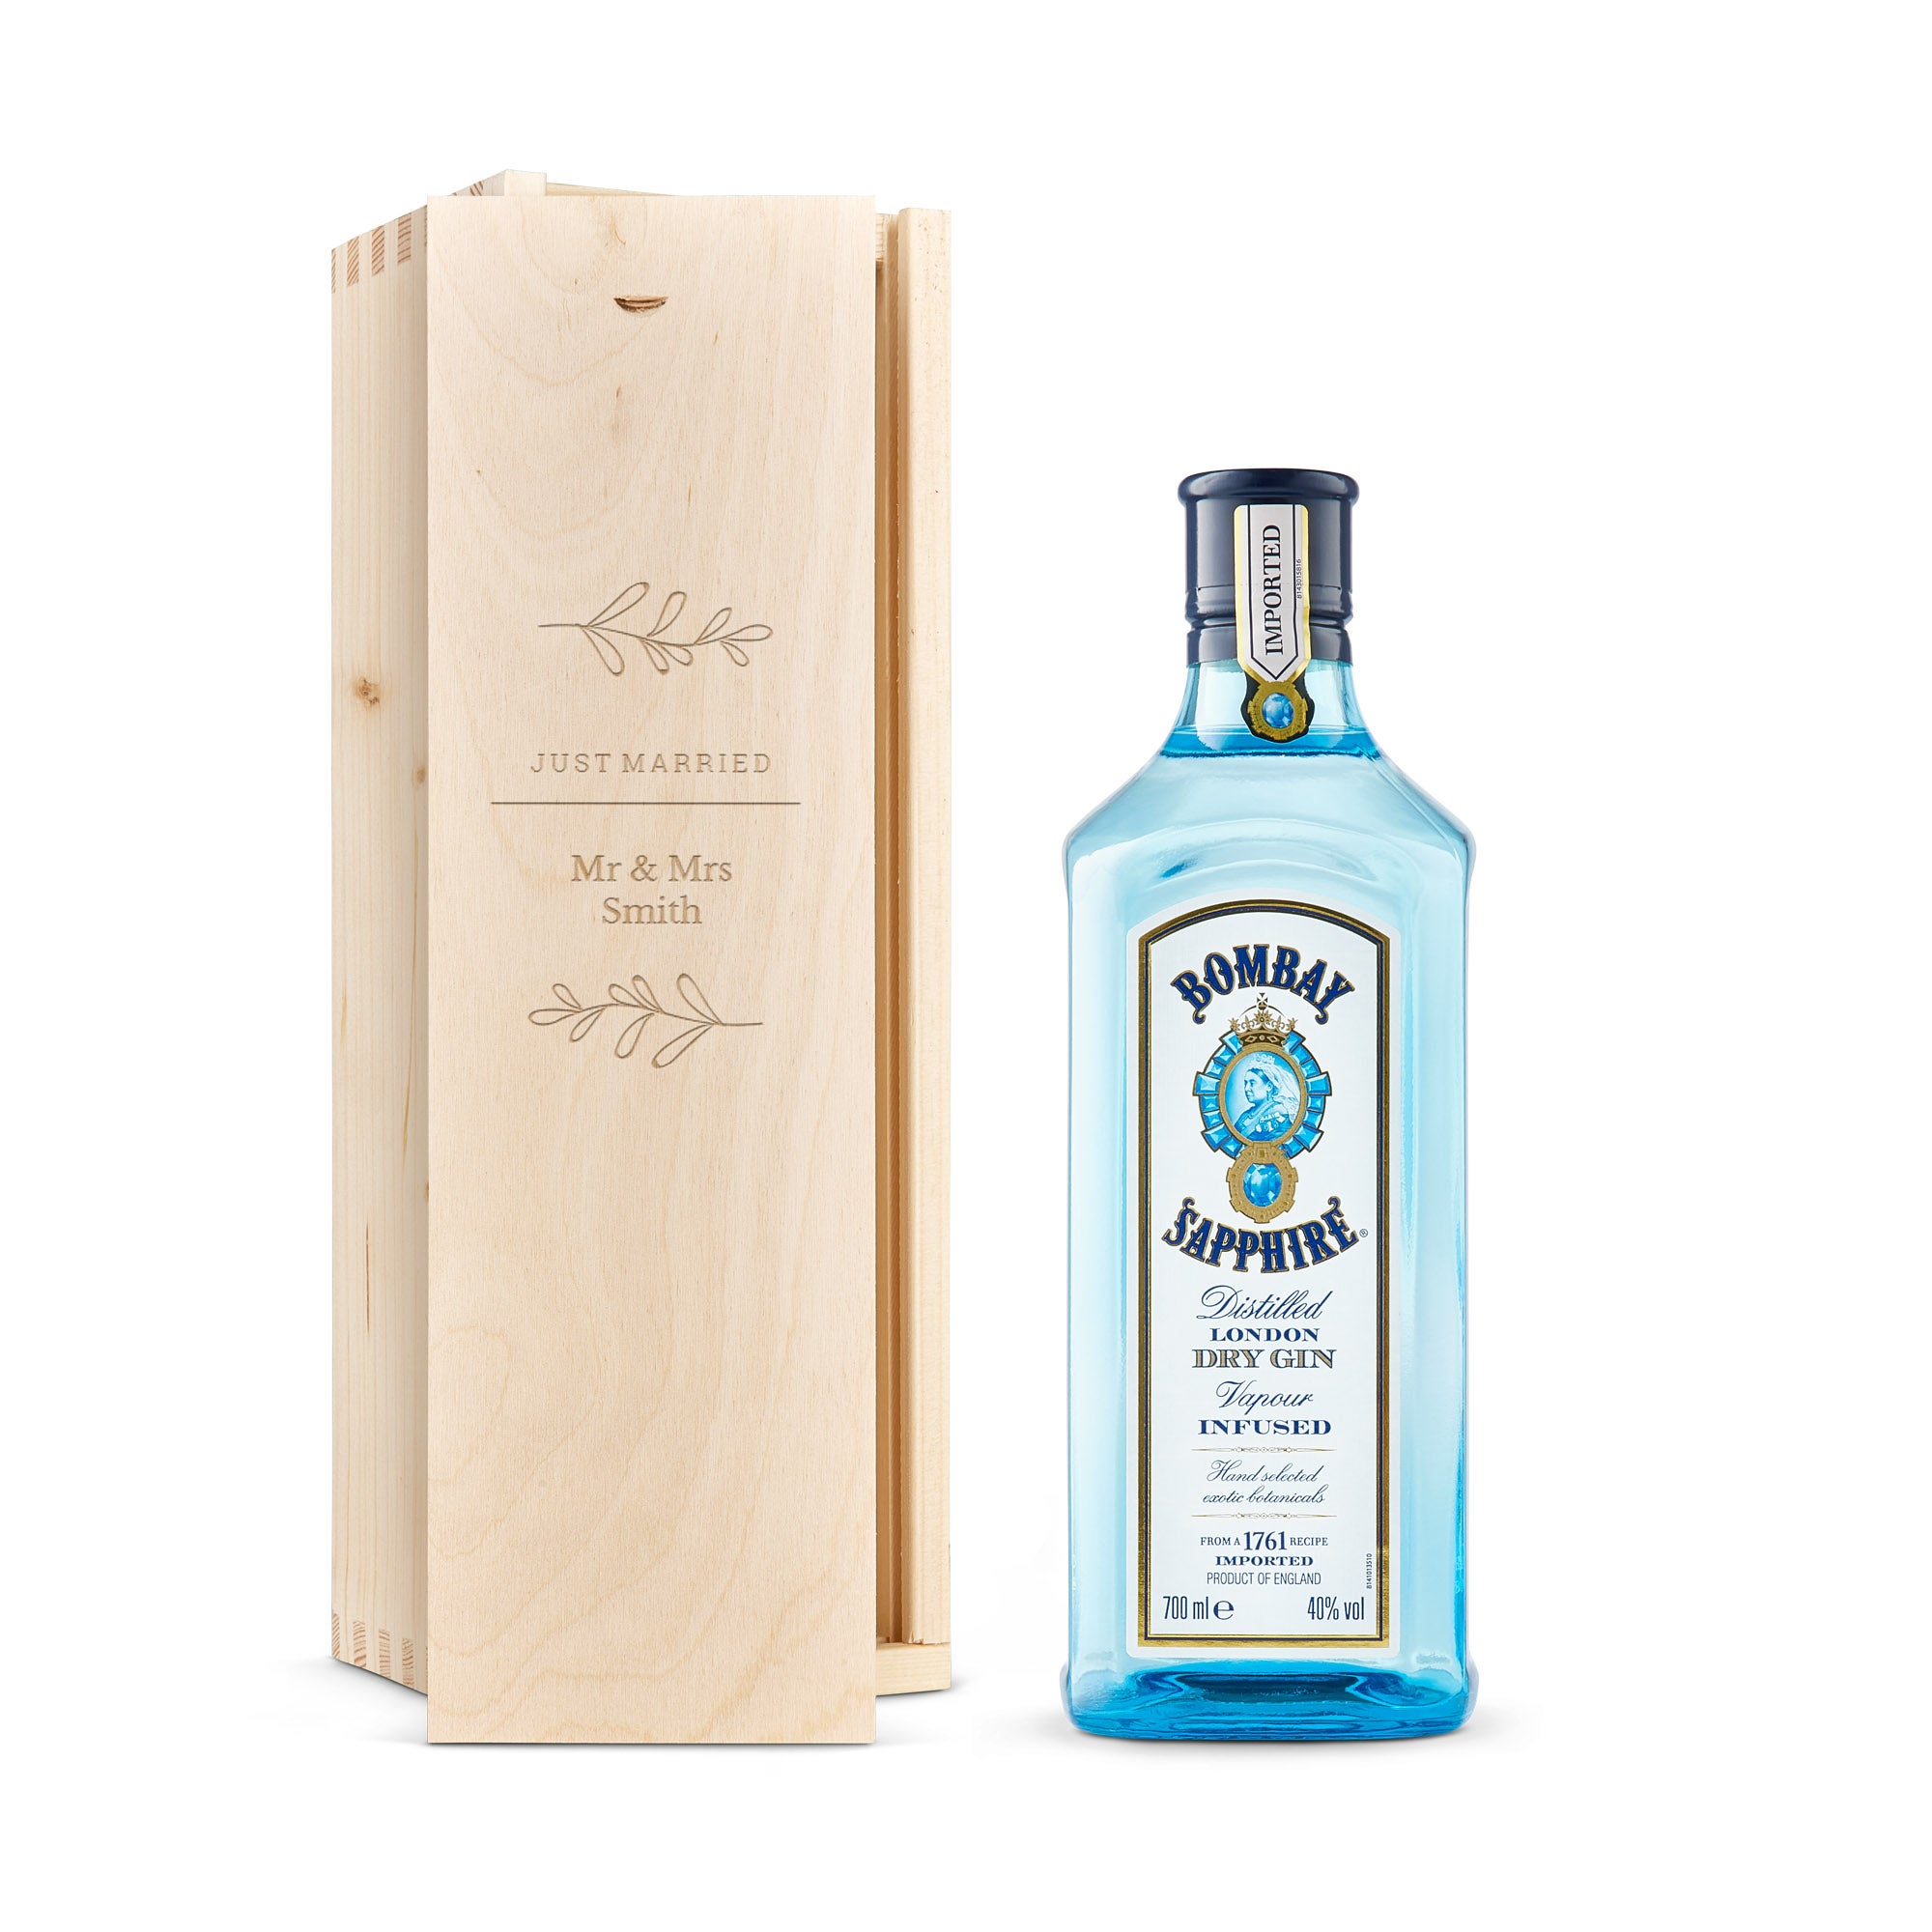 Personalised gin gift - Bombay Sapphire - Engraved wooden case